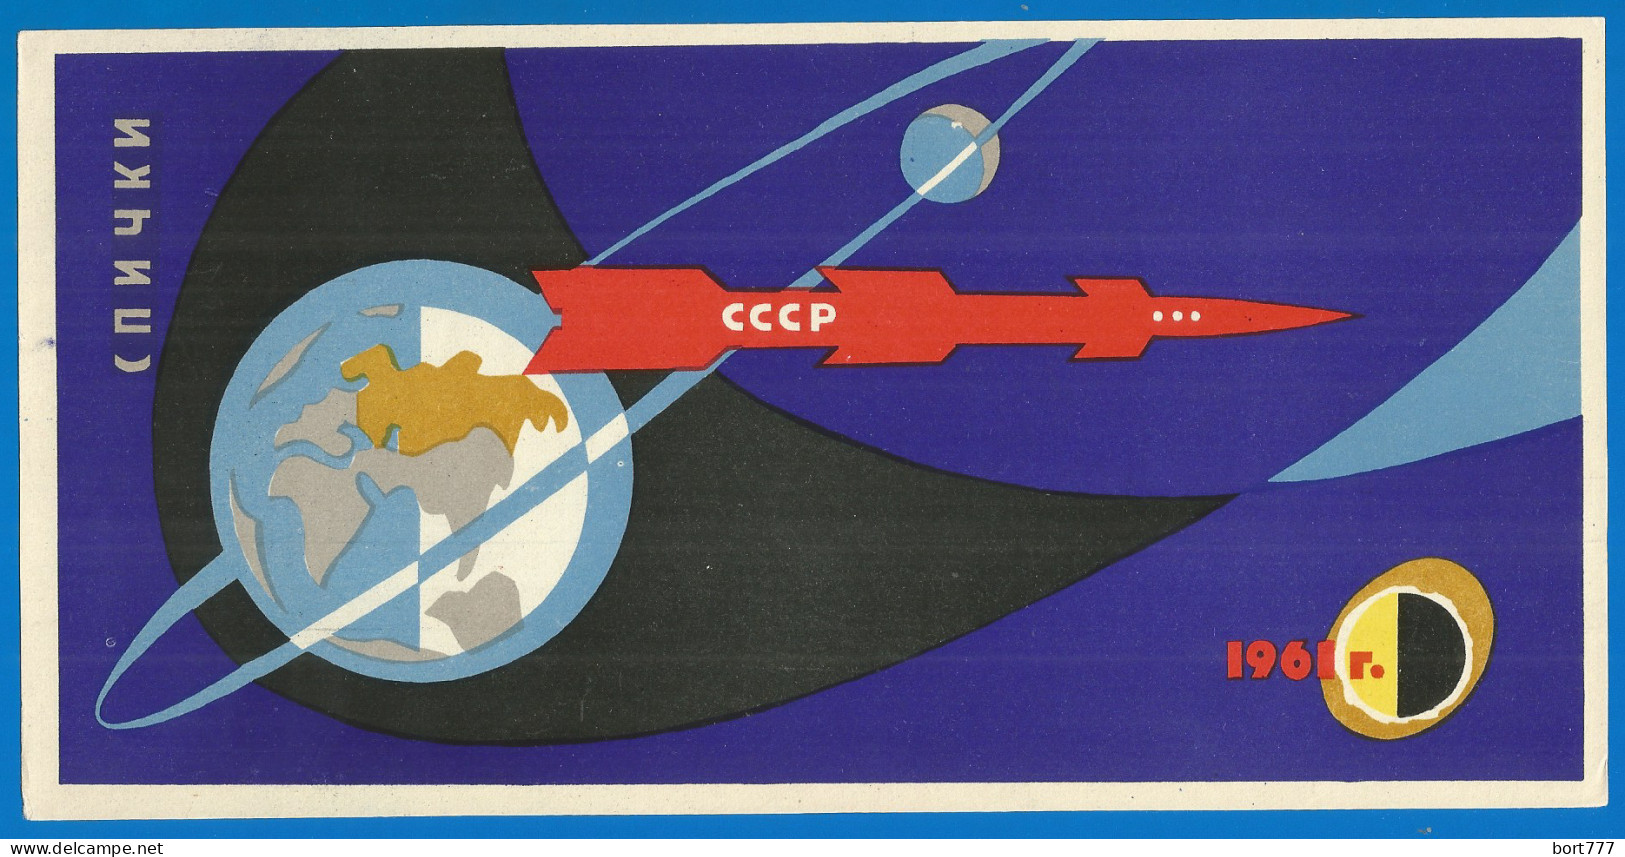 RUSSIA 1961 GROSS Matchbox Label - The Conquest Of Space (catalog #87) - Matchbox Labels